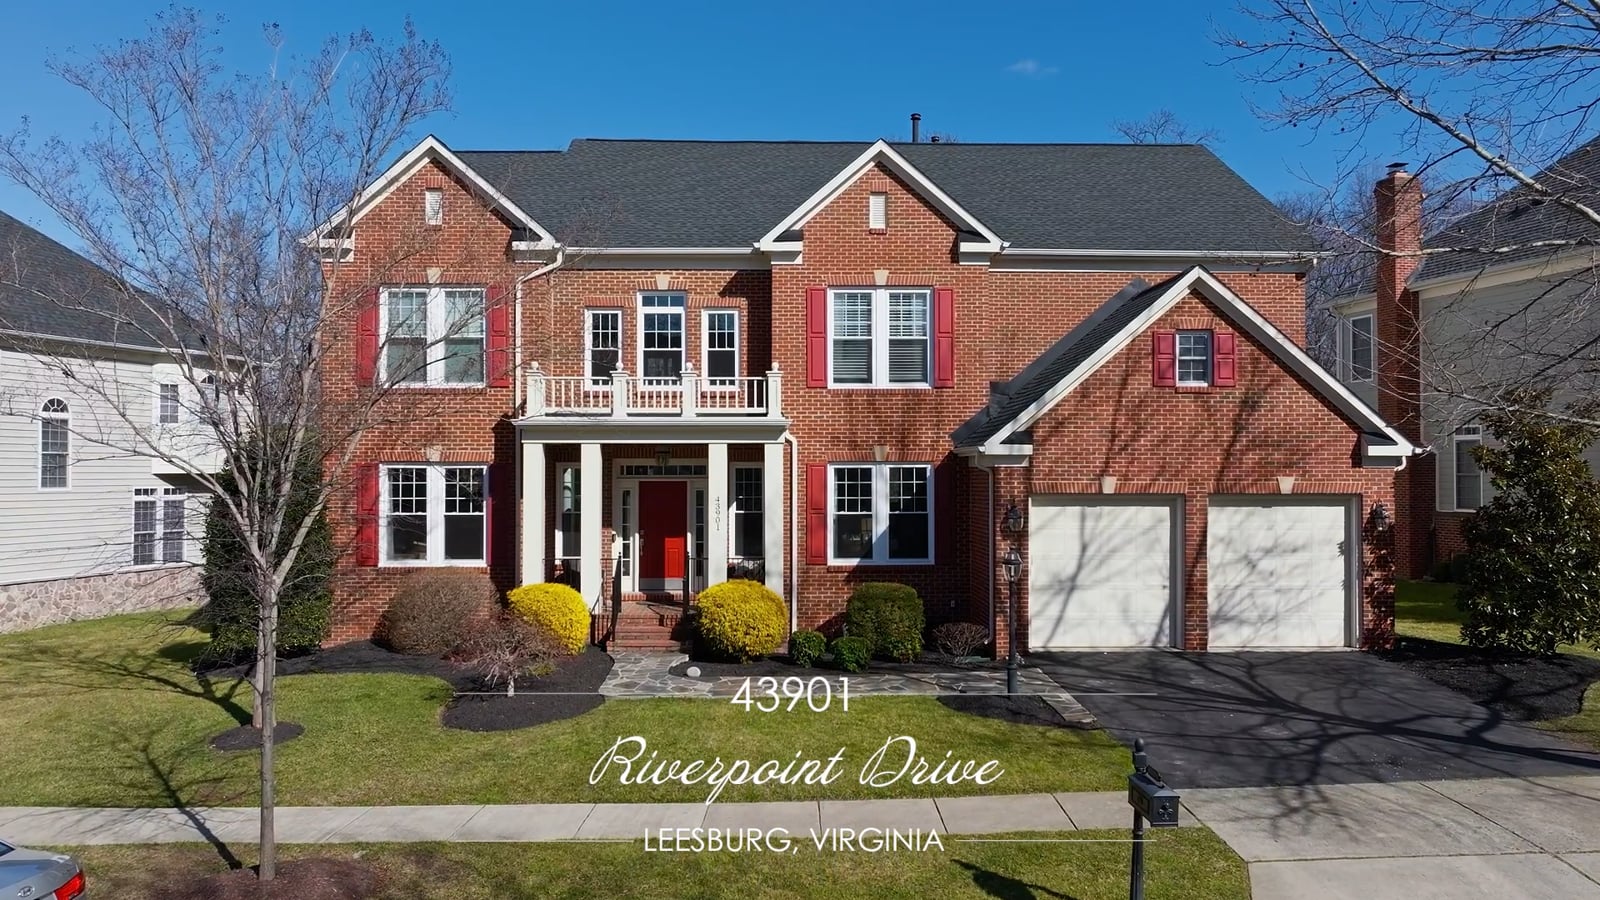 Listing Photo of 43901 Riverpoint Drive, Leesburg, VA 20176